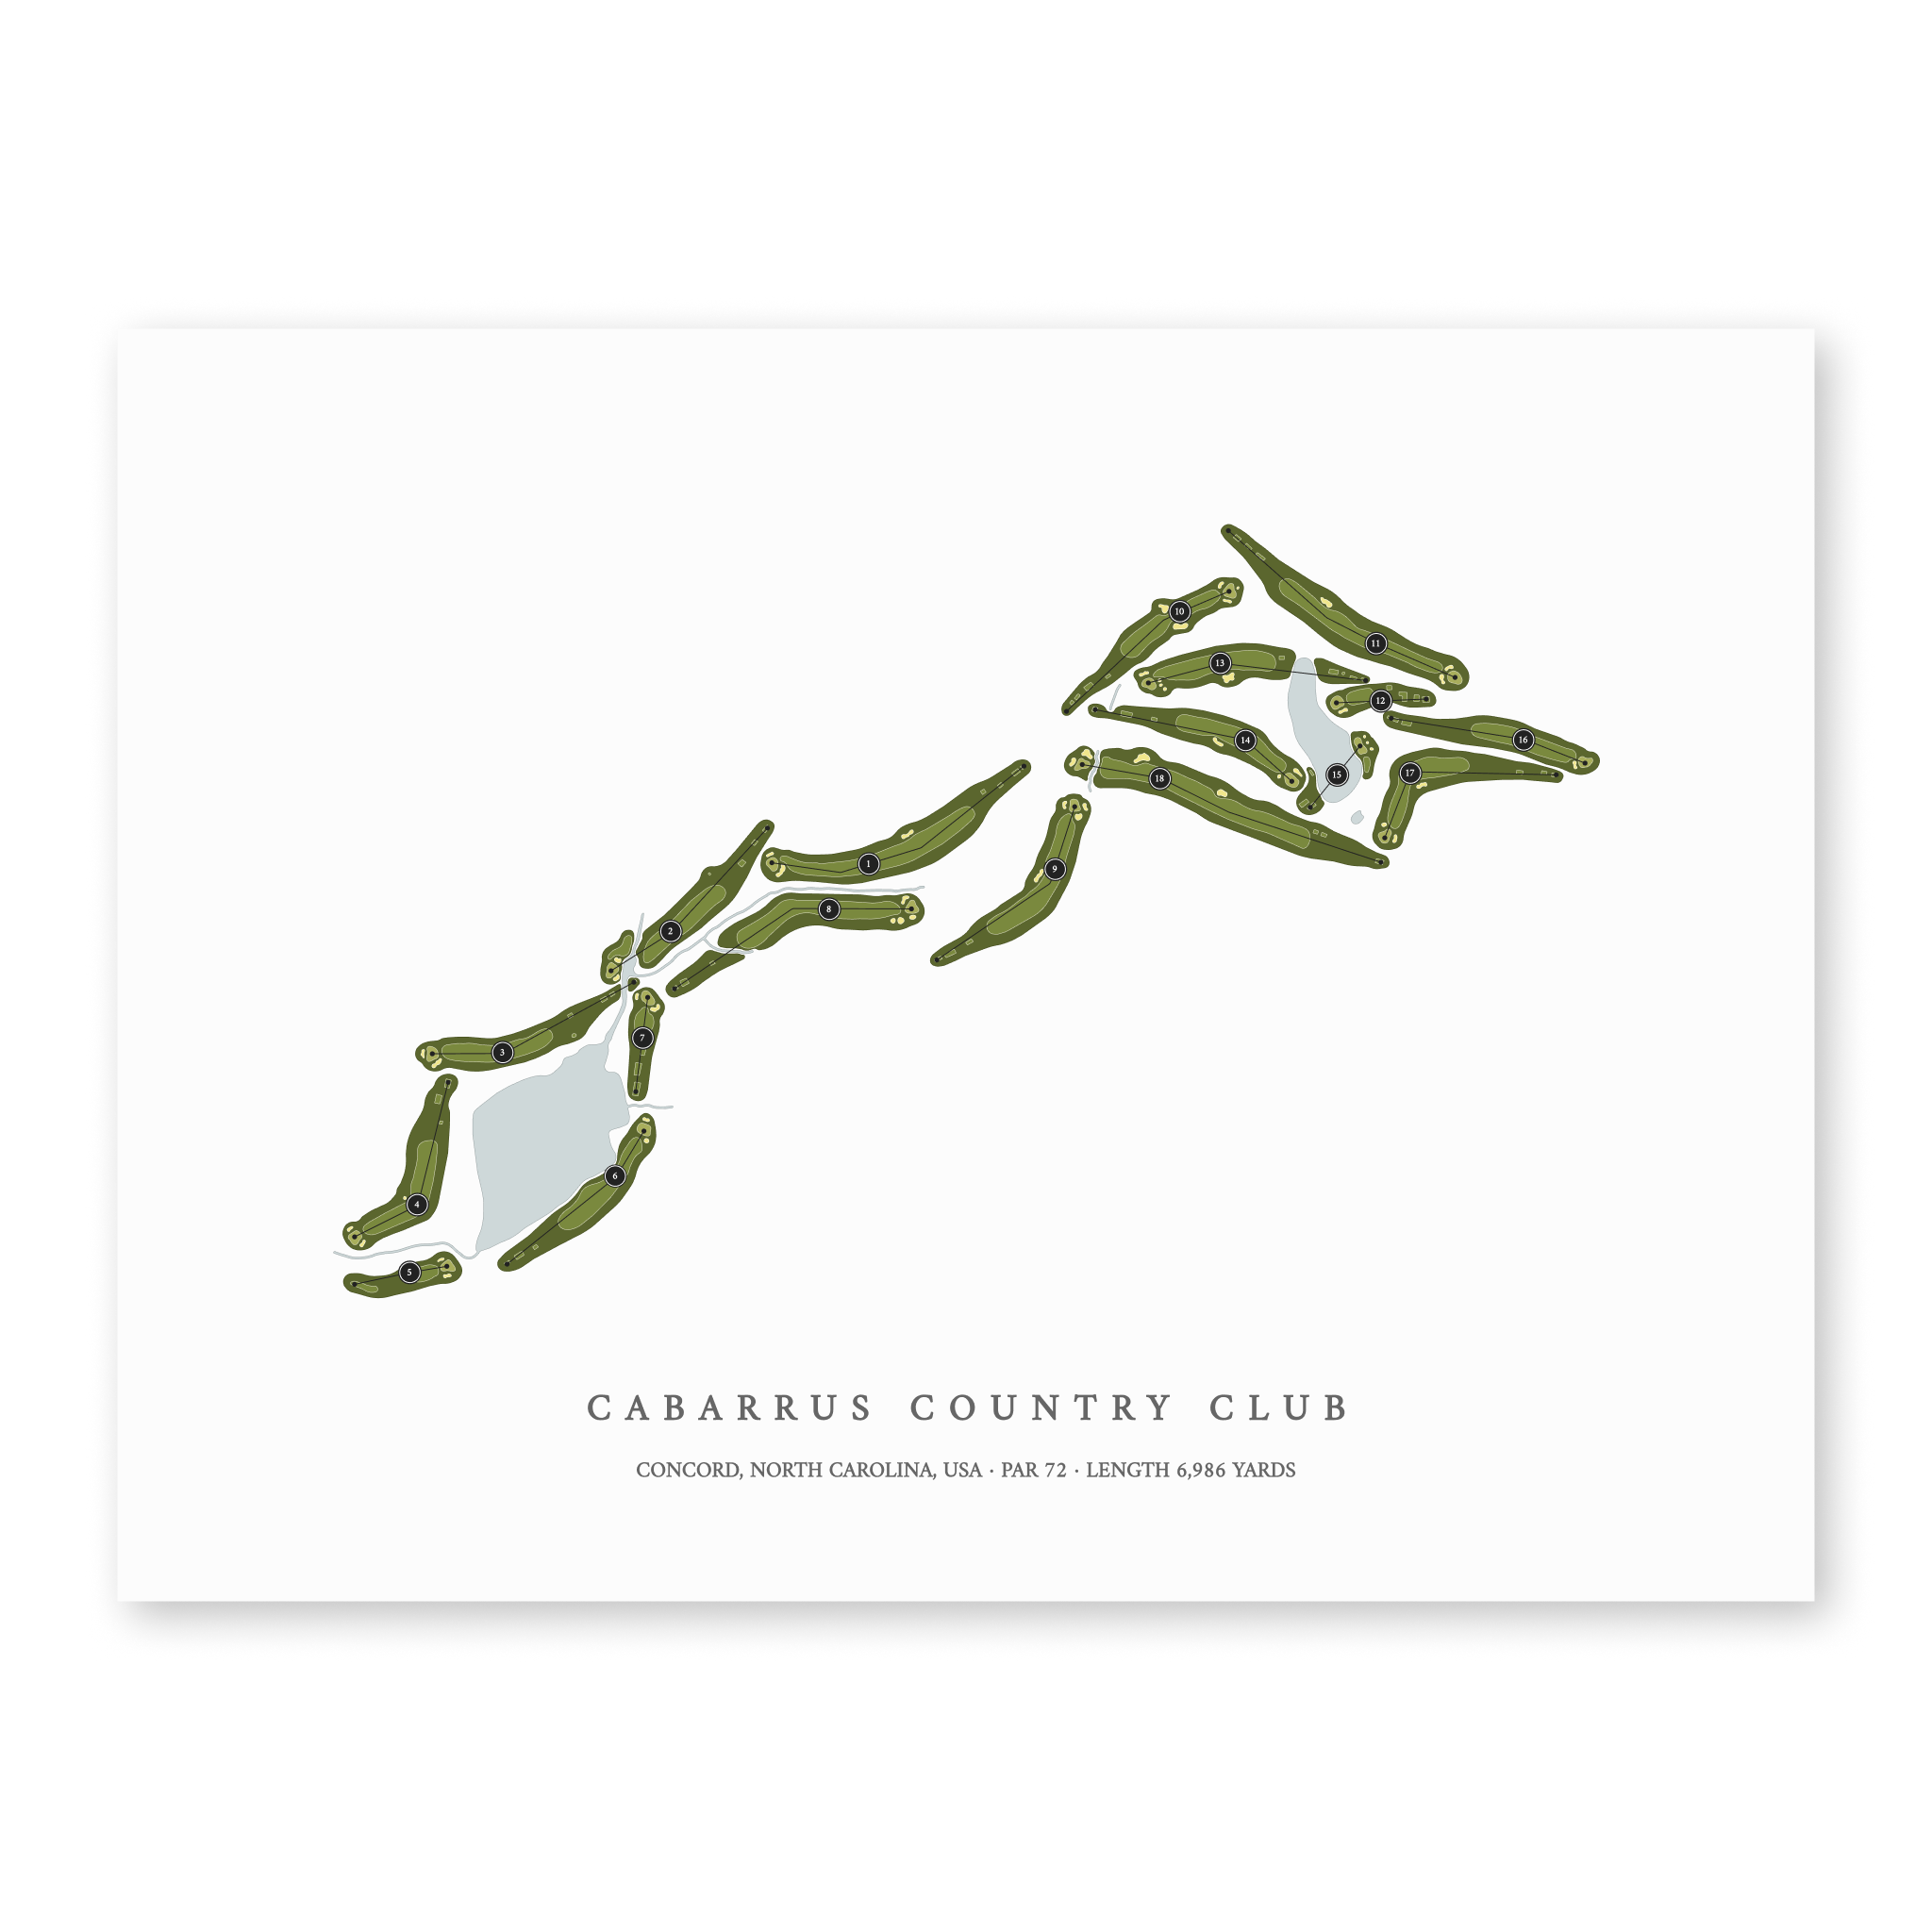 Cabarrus Country Club | Golf Course Map | Unframed With Hole Numbers #hole numbers_yes